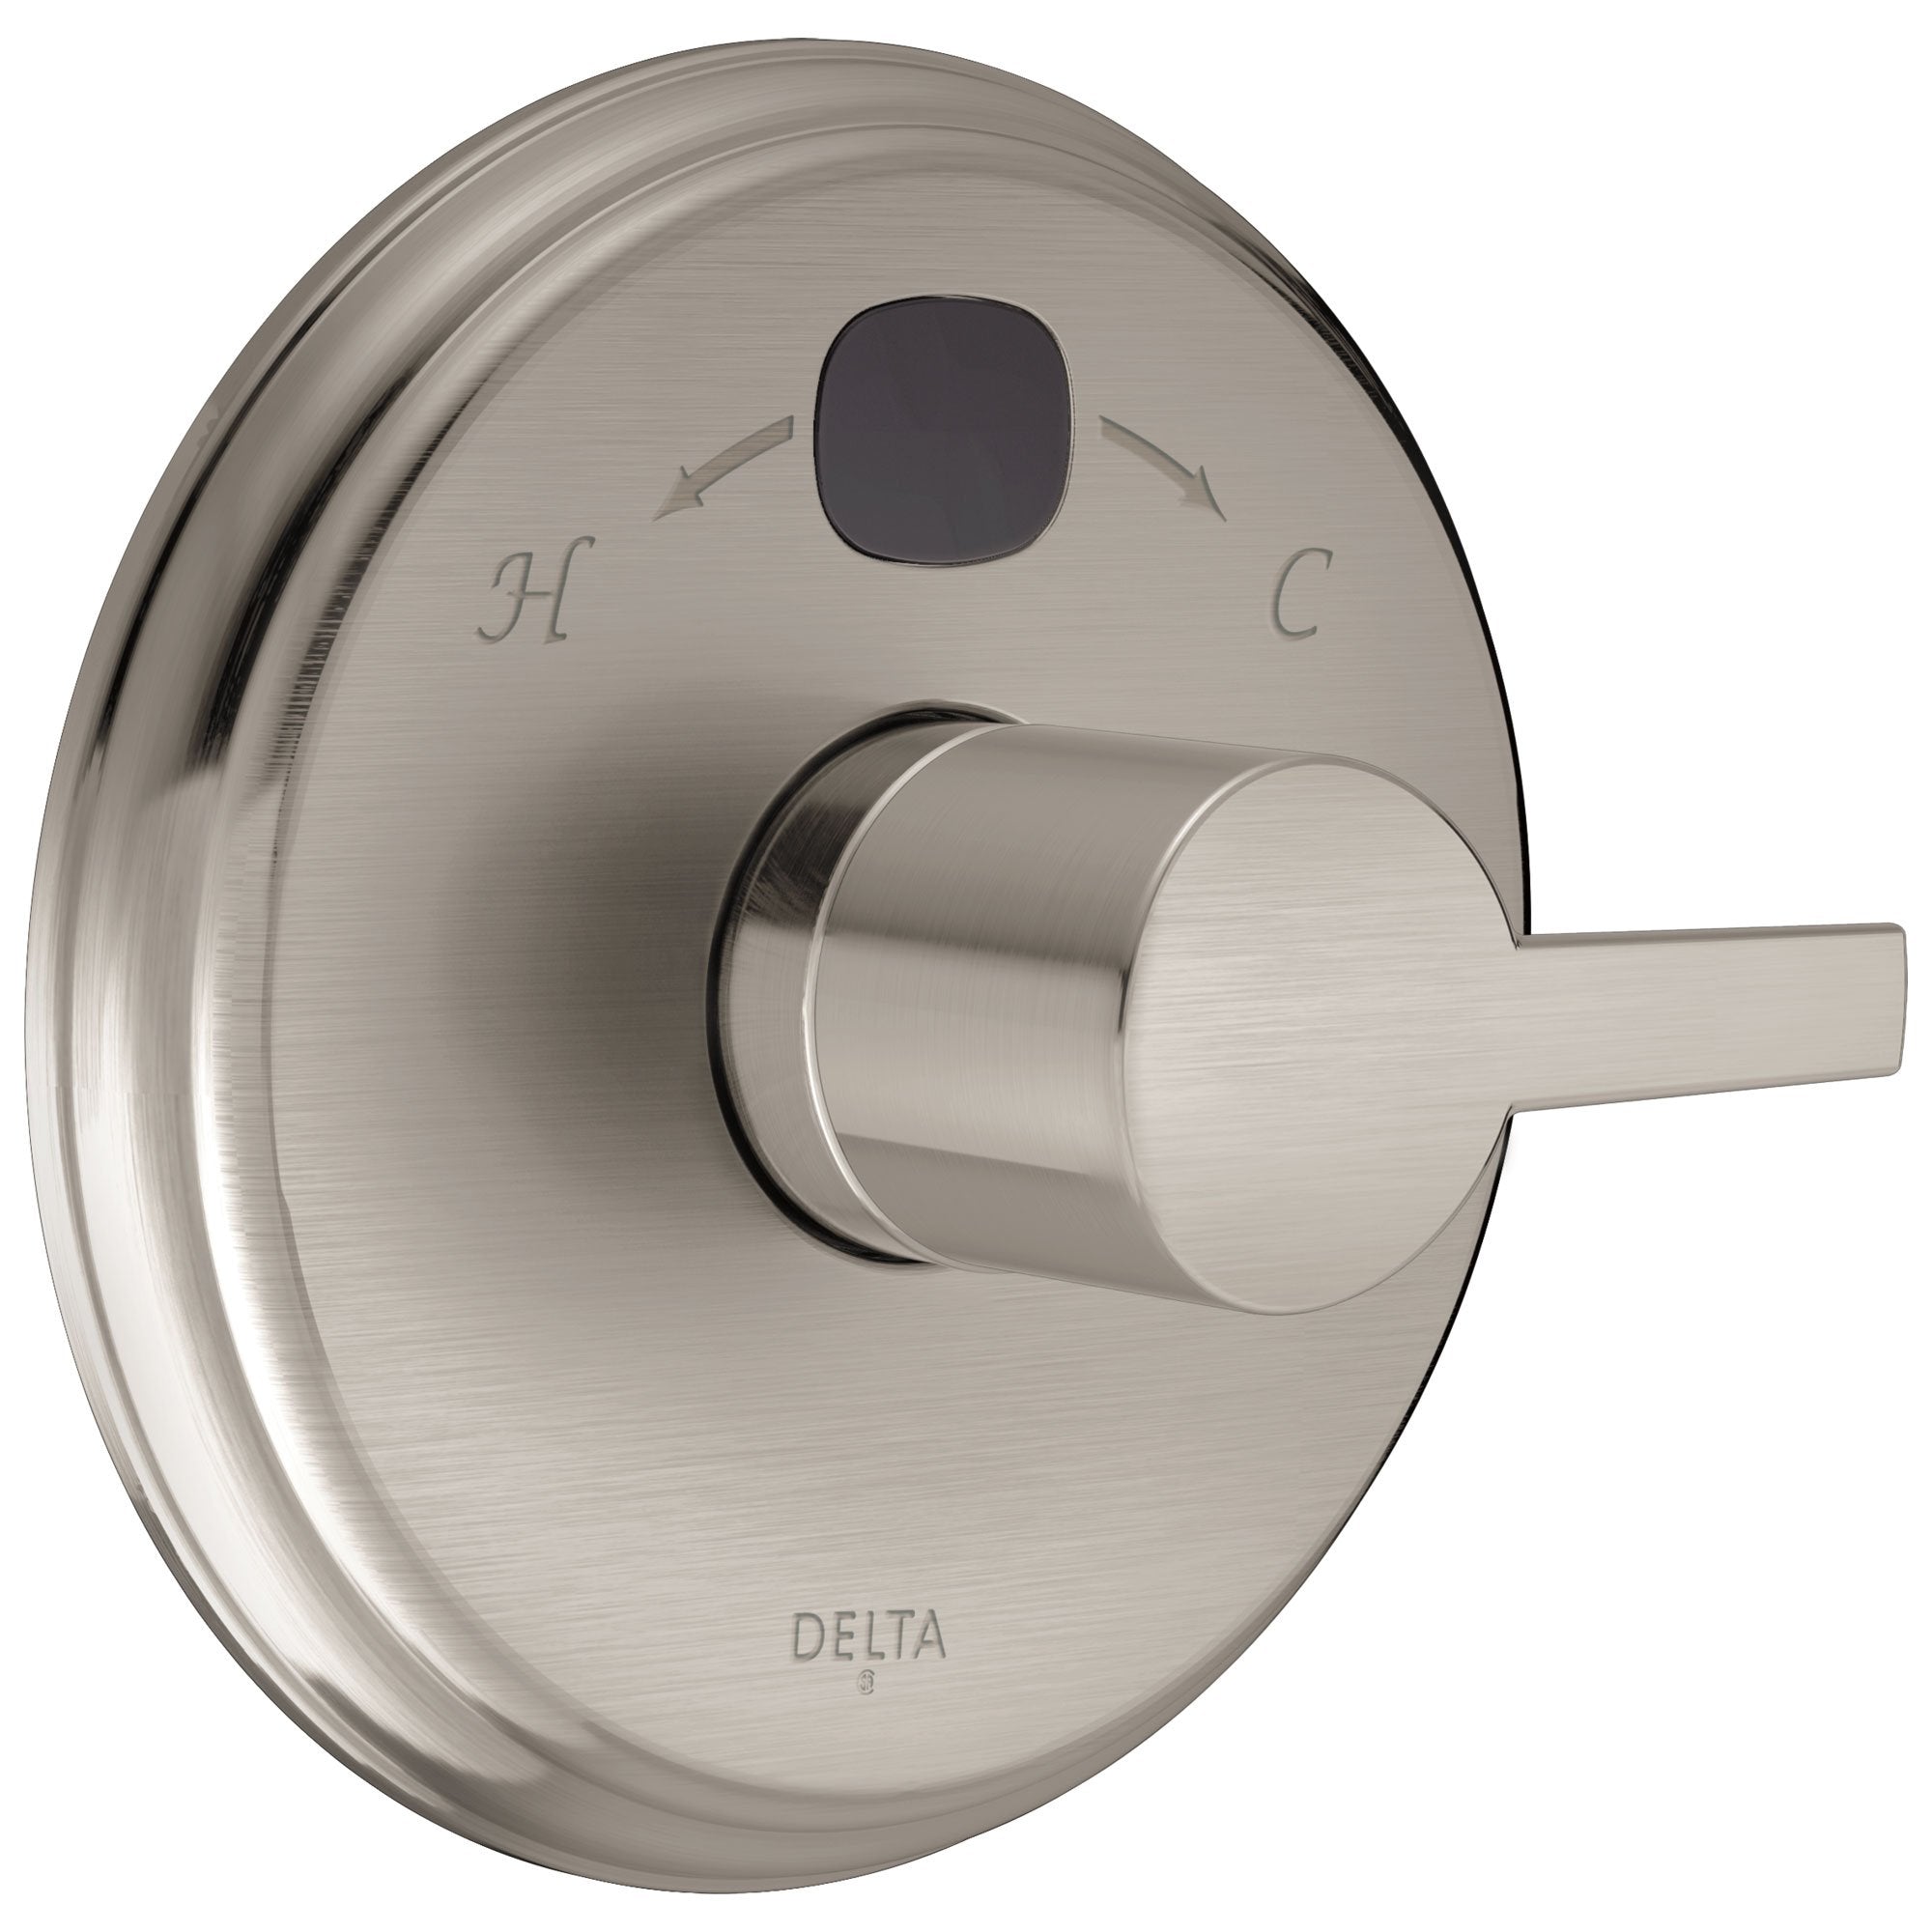 Delta Stainless Steel Finish Compel 14 Series Digital Display Temp2O Shower Valve Control COMPLETE with Single Lever Handle and Rough-in Valve with Stops D1663V